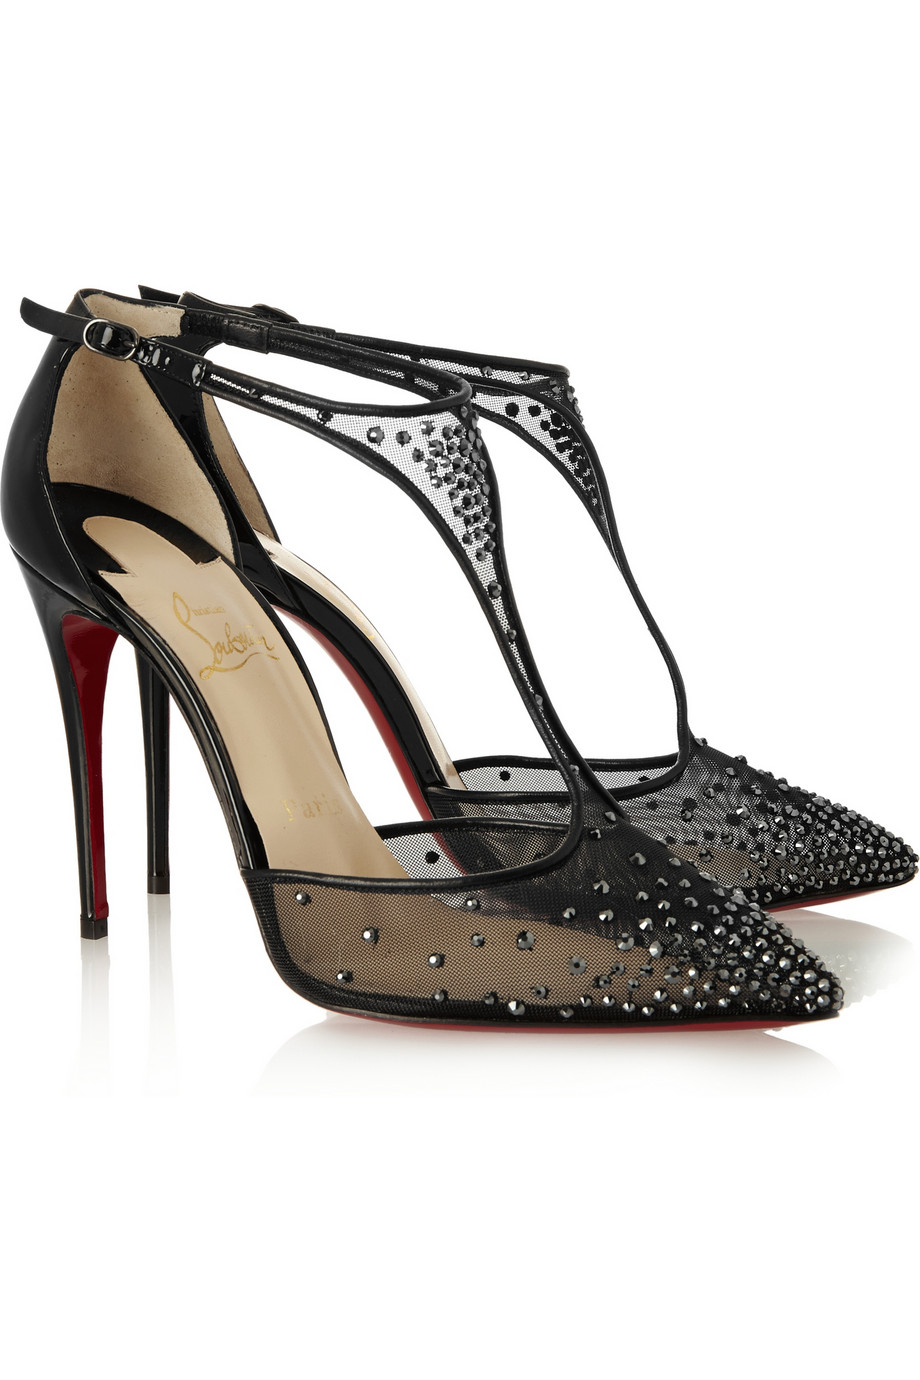 black spiked red bottom heels - Christian louboutin Salopatina Embellished Patent Leather Pumps in ...